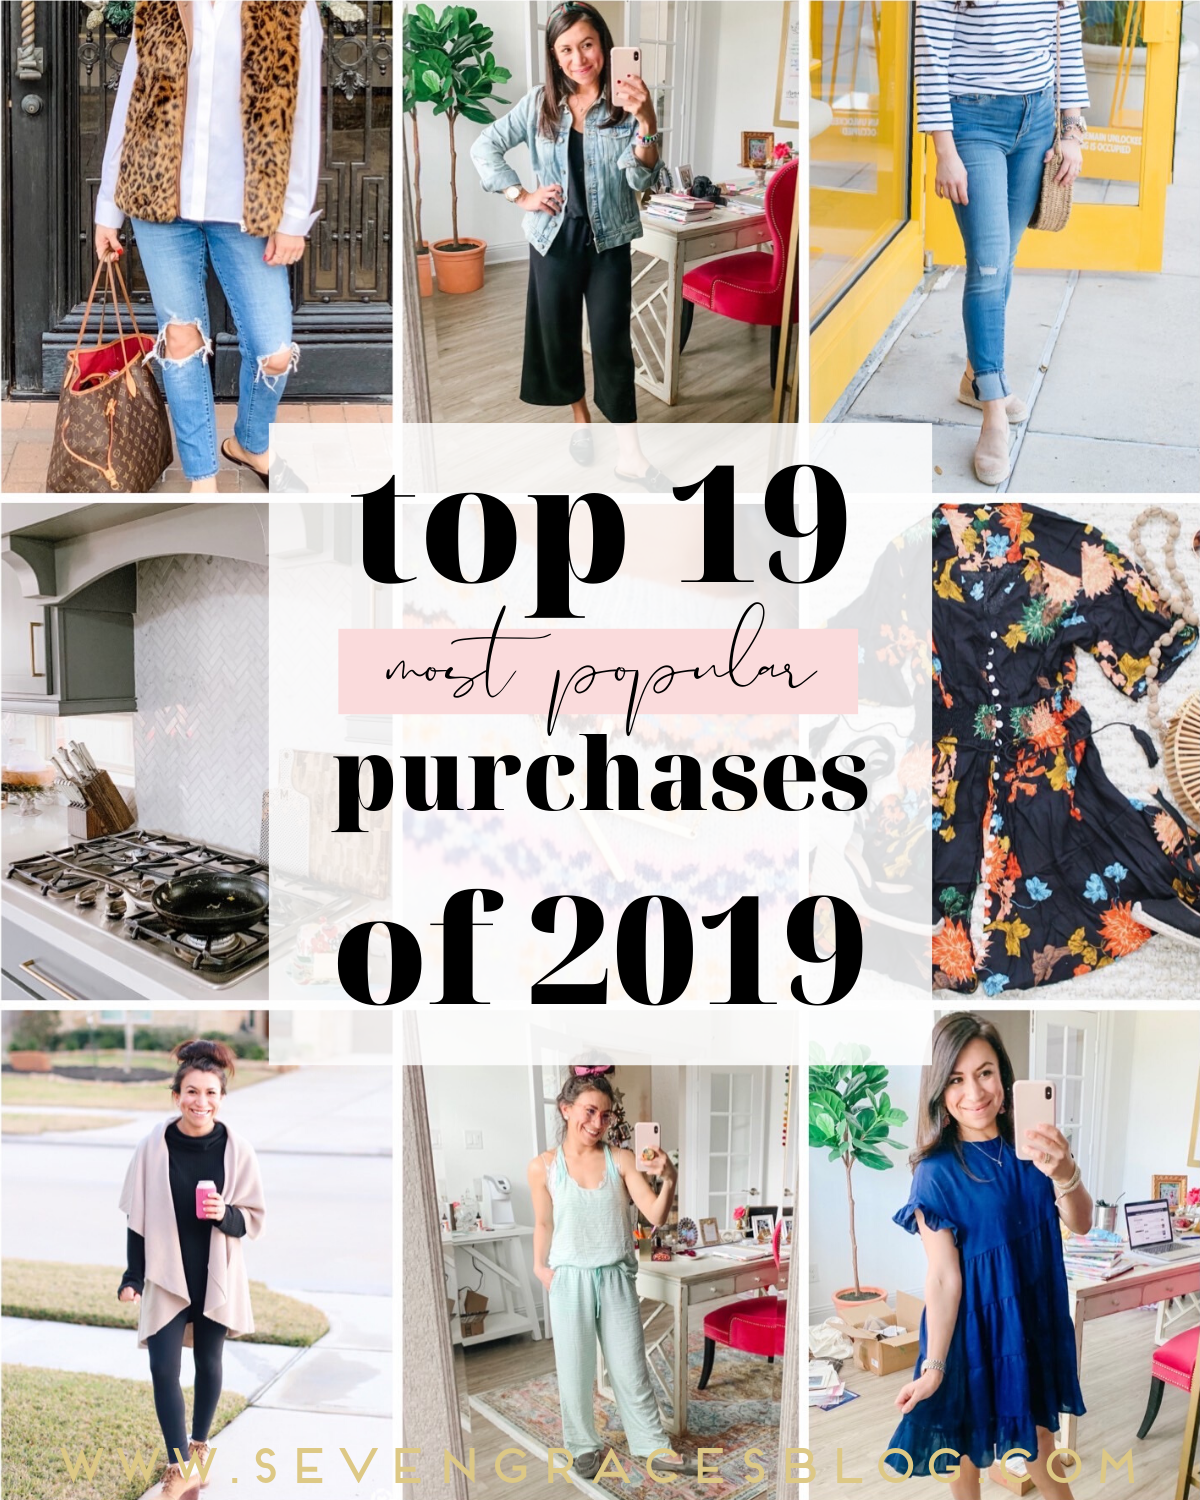 Top 19 most popular purchases of 2019 from Seven Graces Blog.